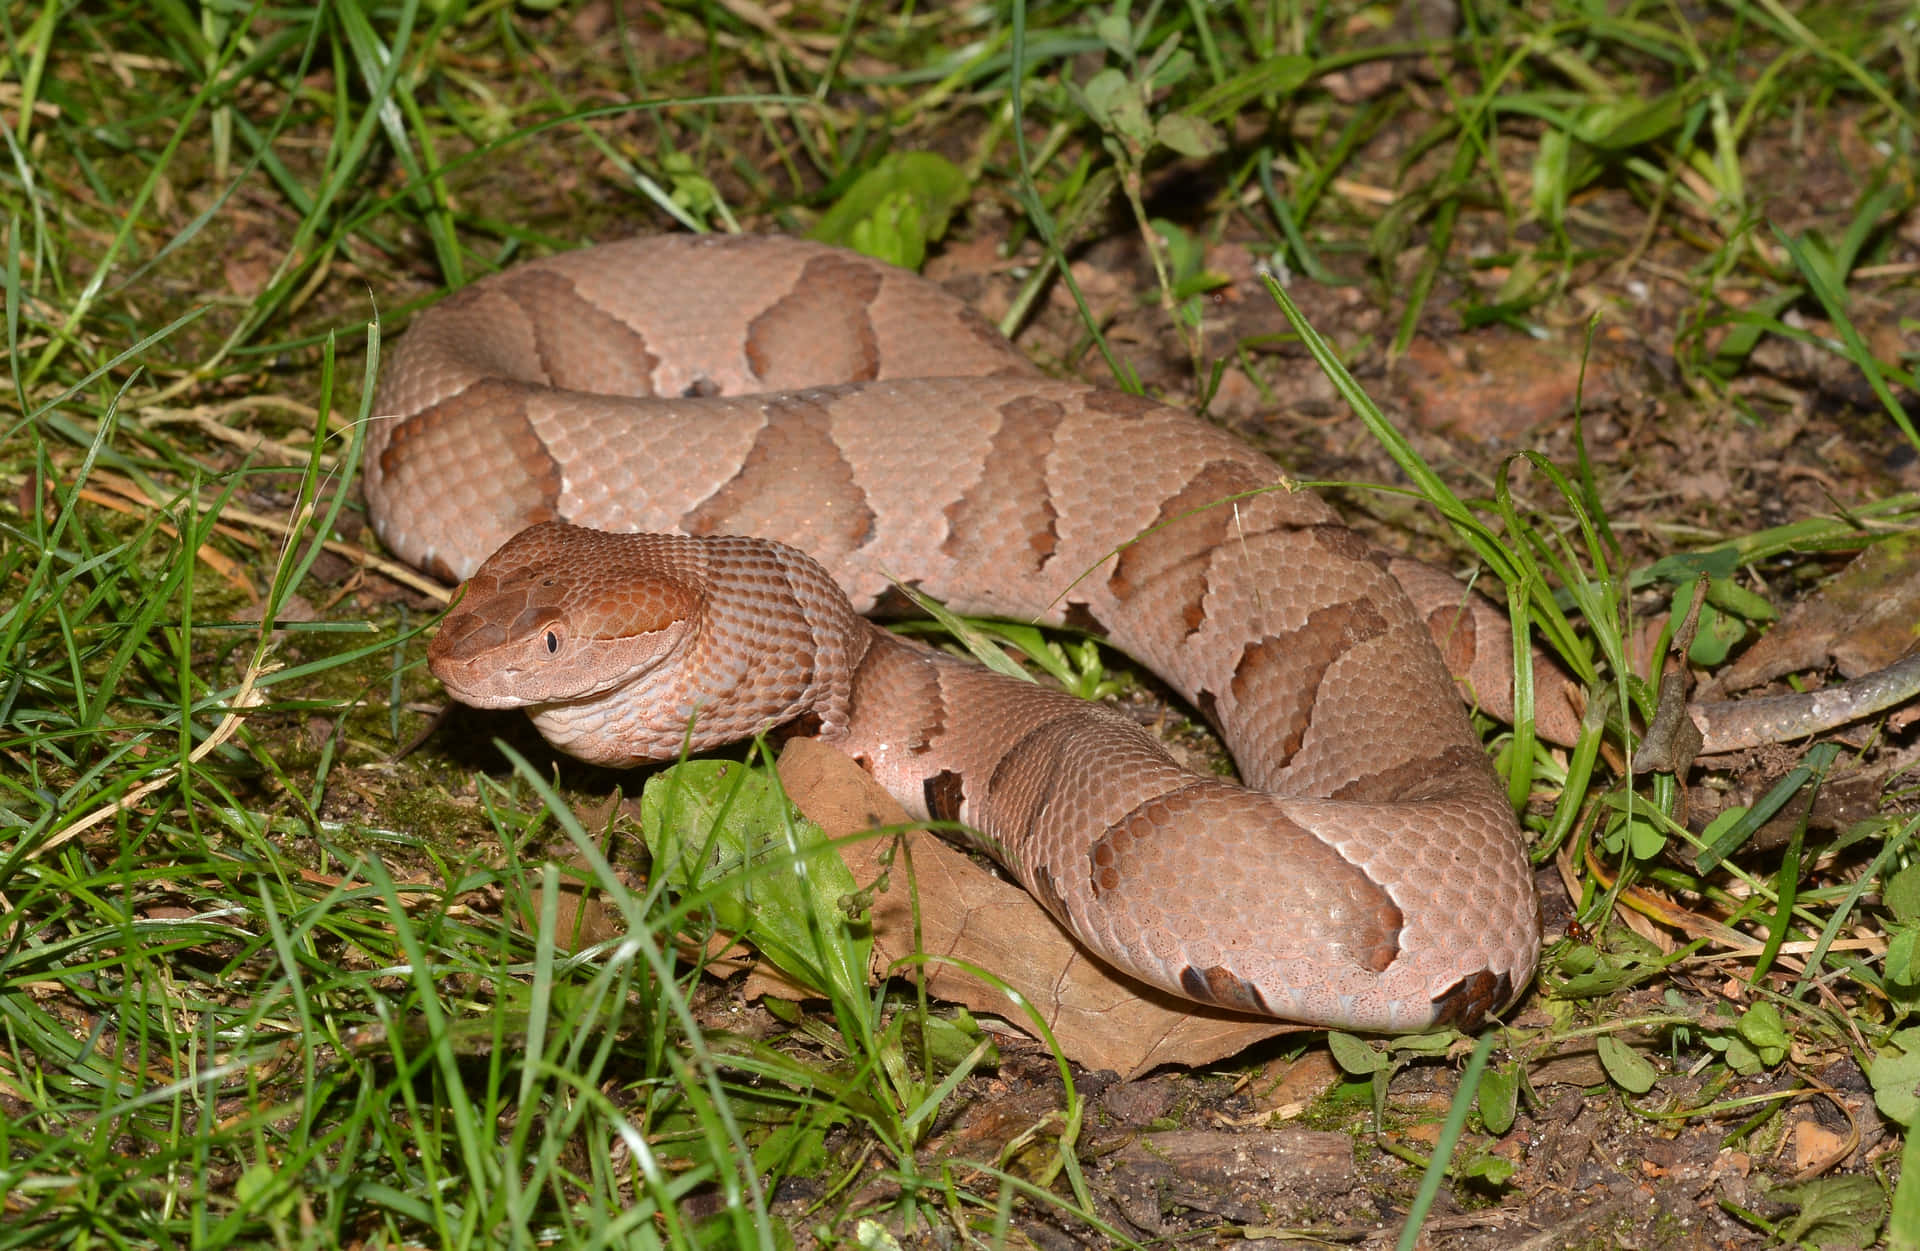 A Copperhead Snake Slithering Along the Ground